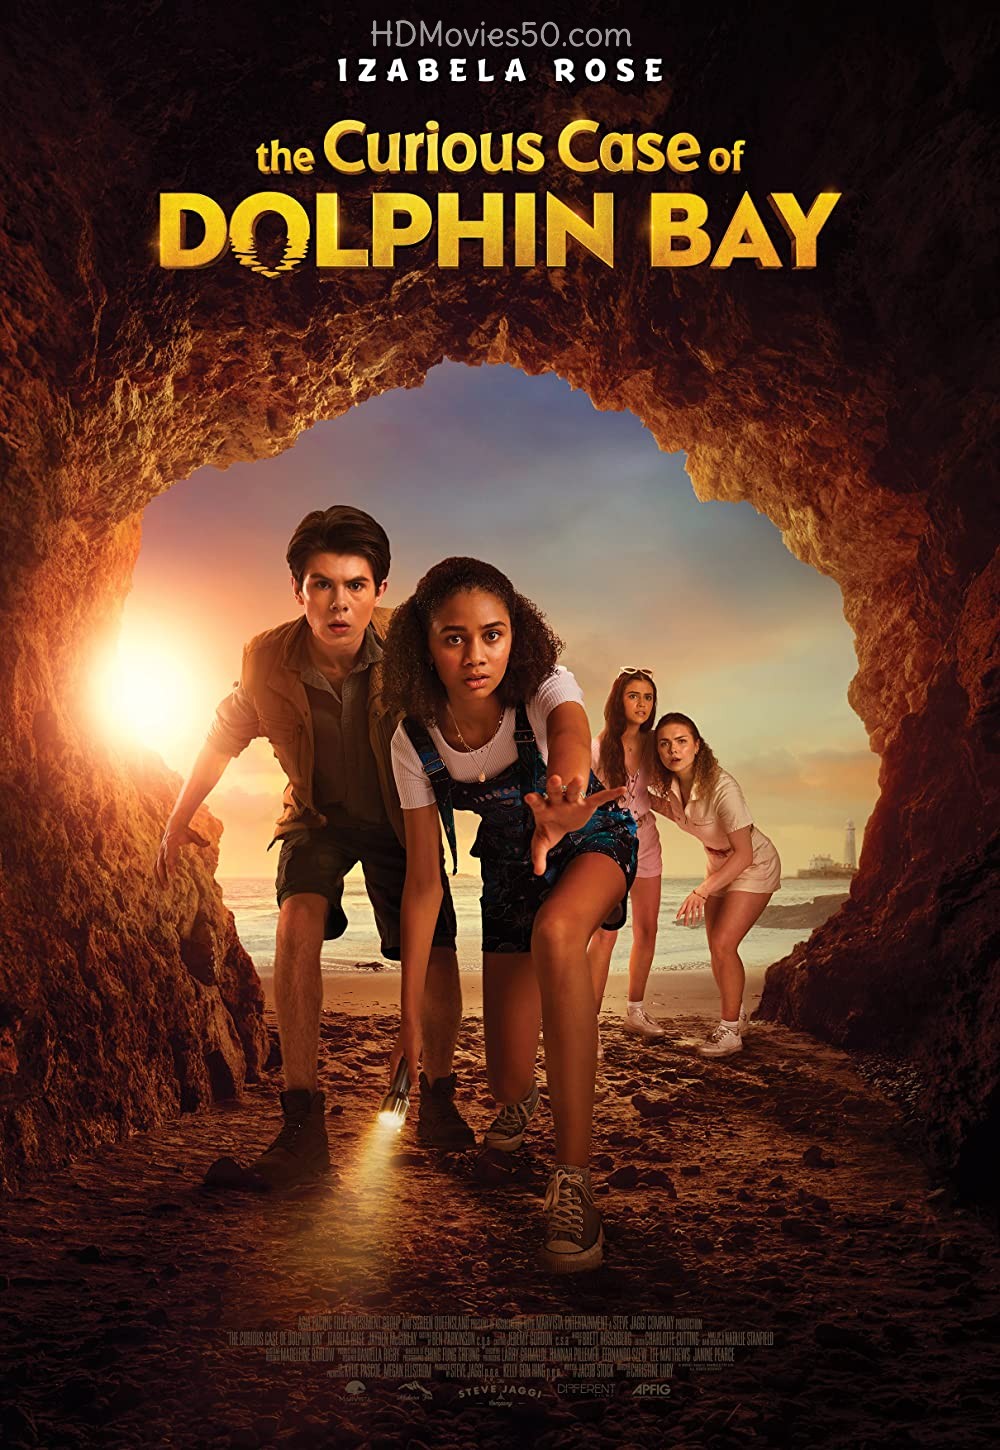 Download The Curious Case of Dolphin Bay 2022 English Movie 1080p HDRip 1.4GB